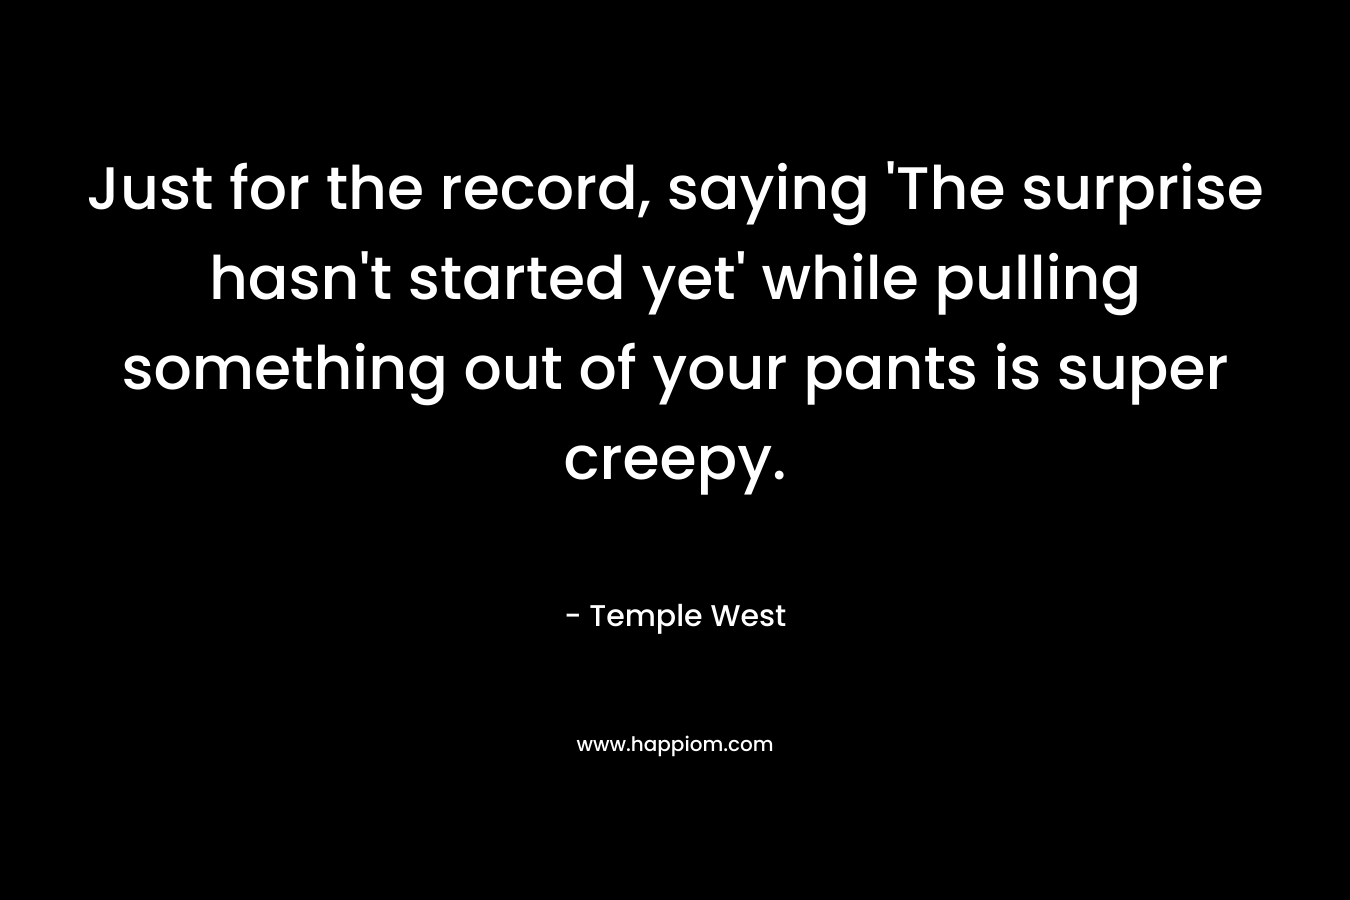 Just for the record, saying ‘The surprise hasn’t started yet’ while pulling something out of your pants is super creepy. – Temple West